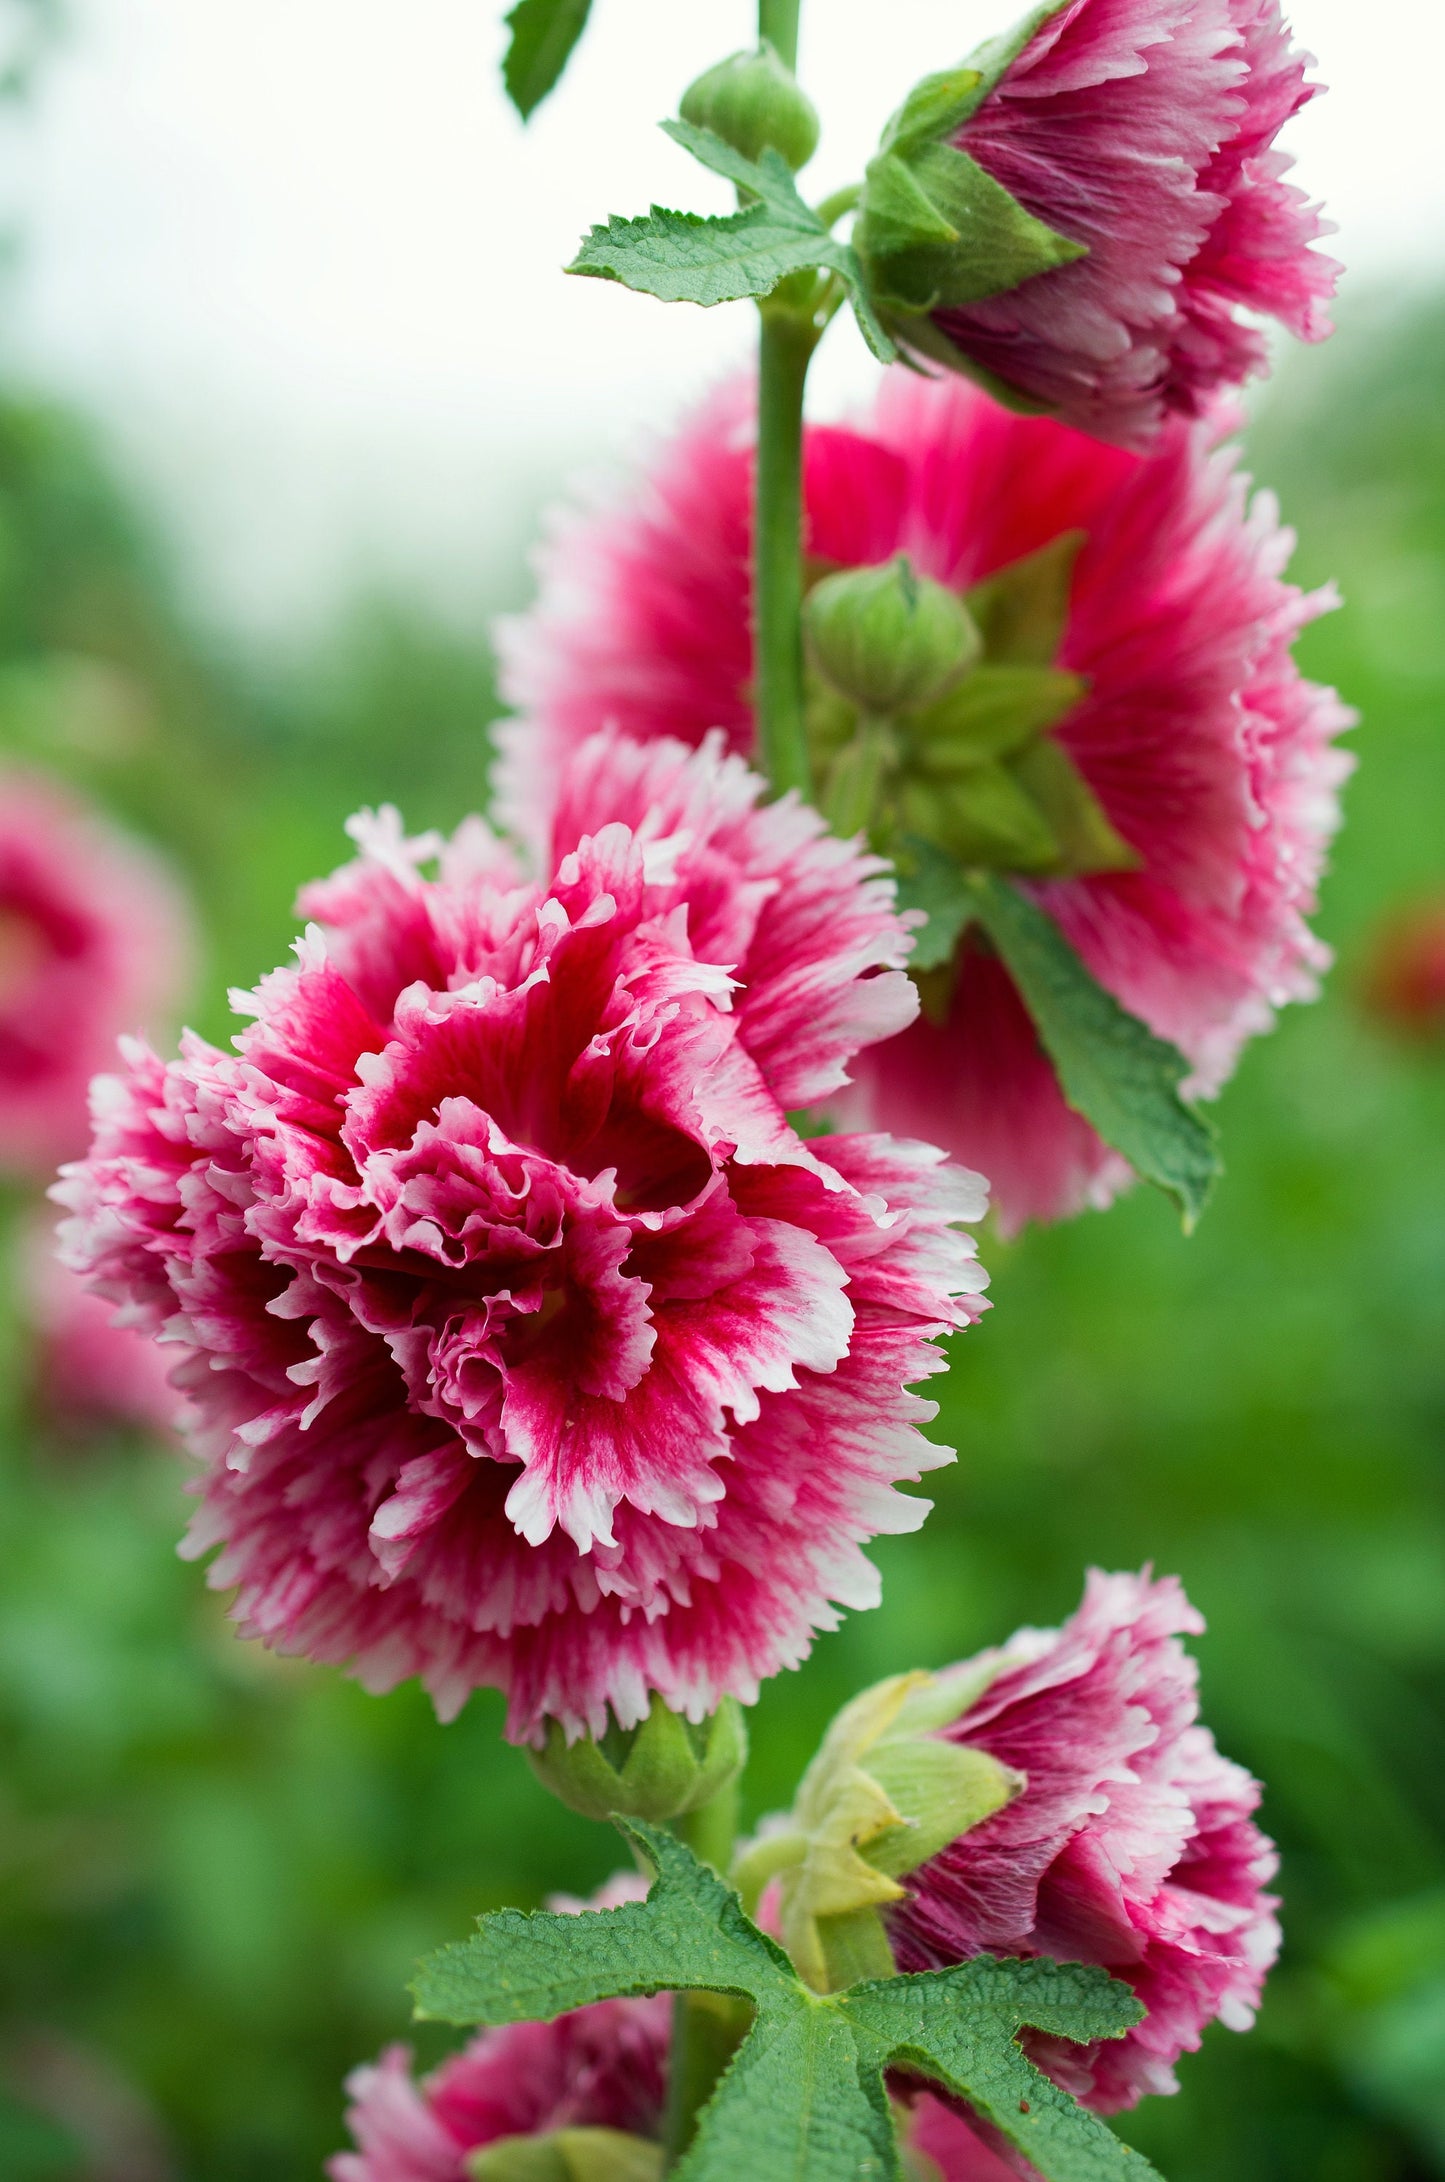 50 SUMMER CARNIVAL HOLLYHOCK Double Mixed Colors Red Pink White Yellow Peach Alcea Rosea Flower Seeds